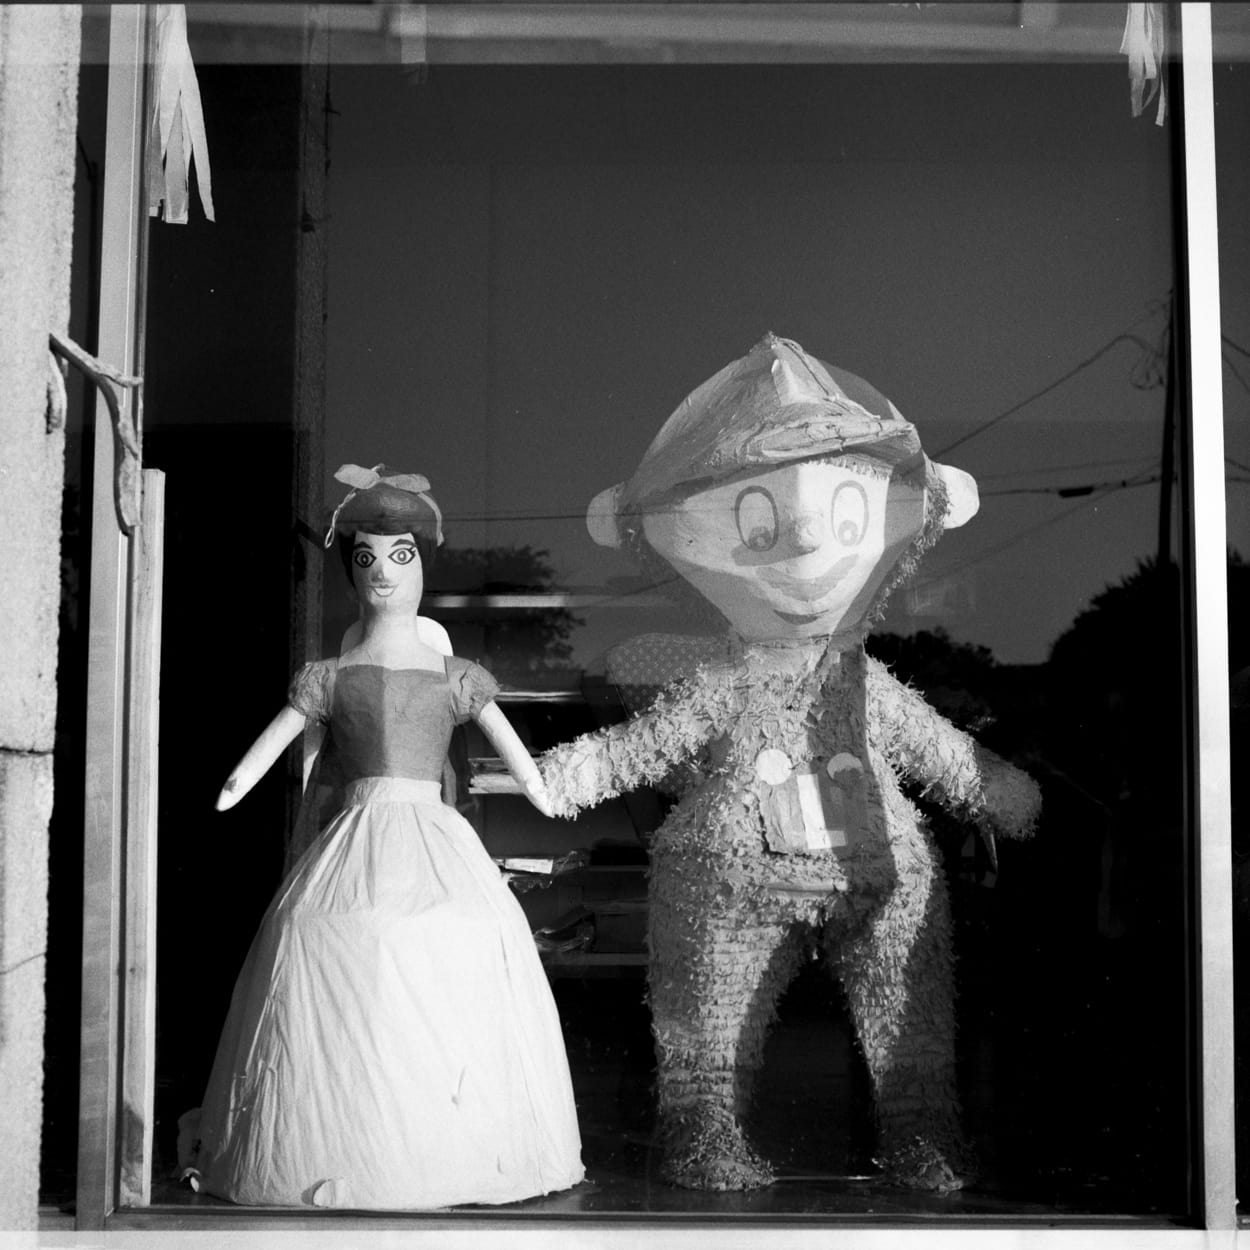 Snow White and Mario piñatas holding hands like two lovers in a window display 